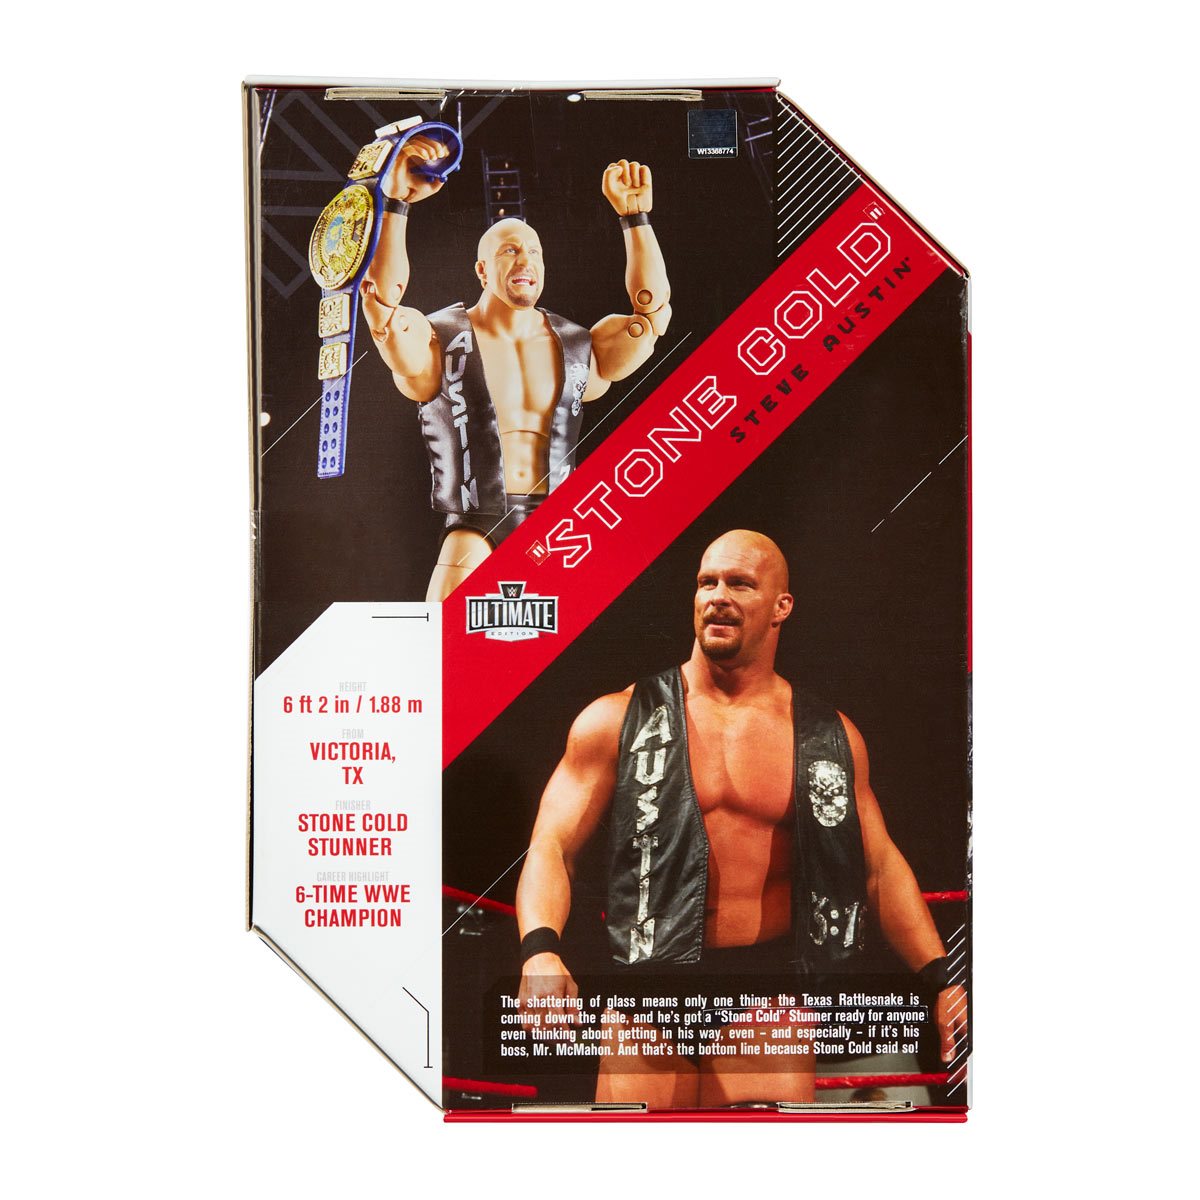 Stone Cold Steve Austin Action Figure back view in a box - heretoserveyou